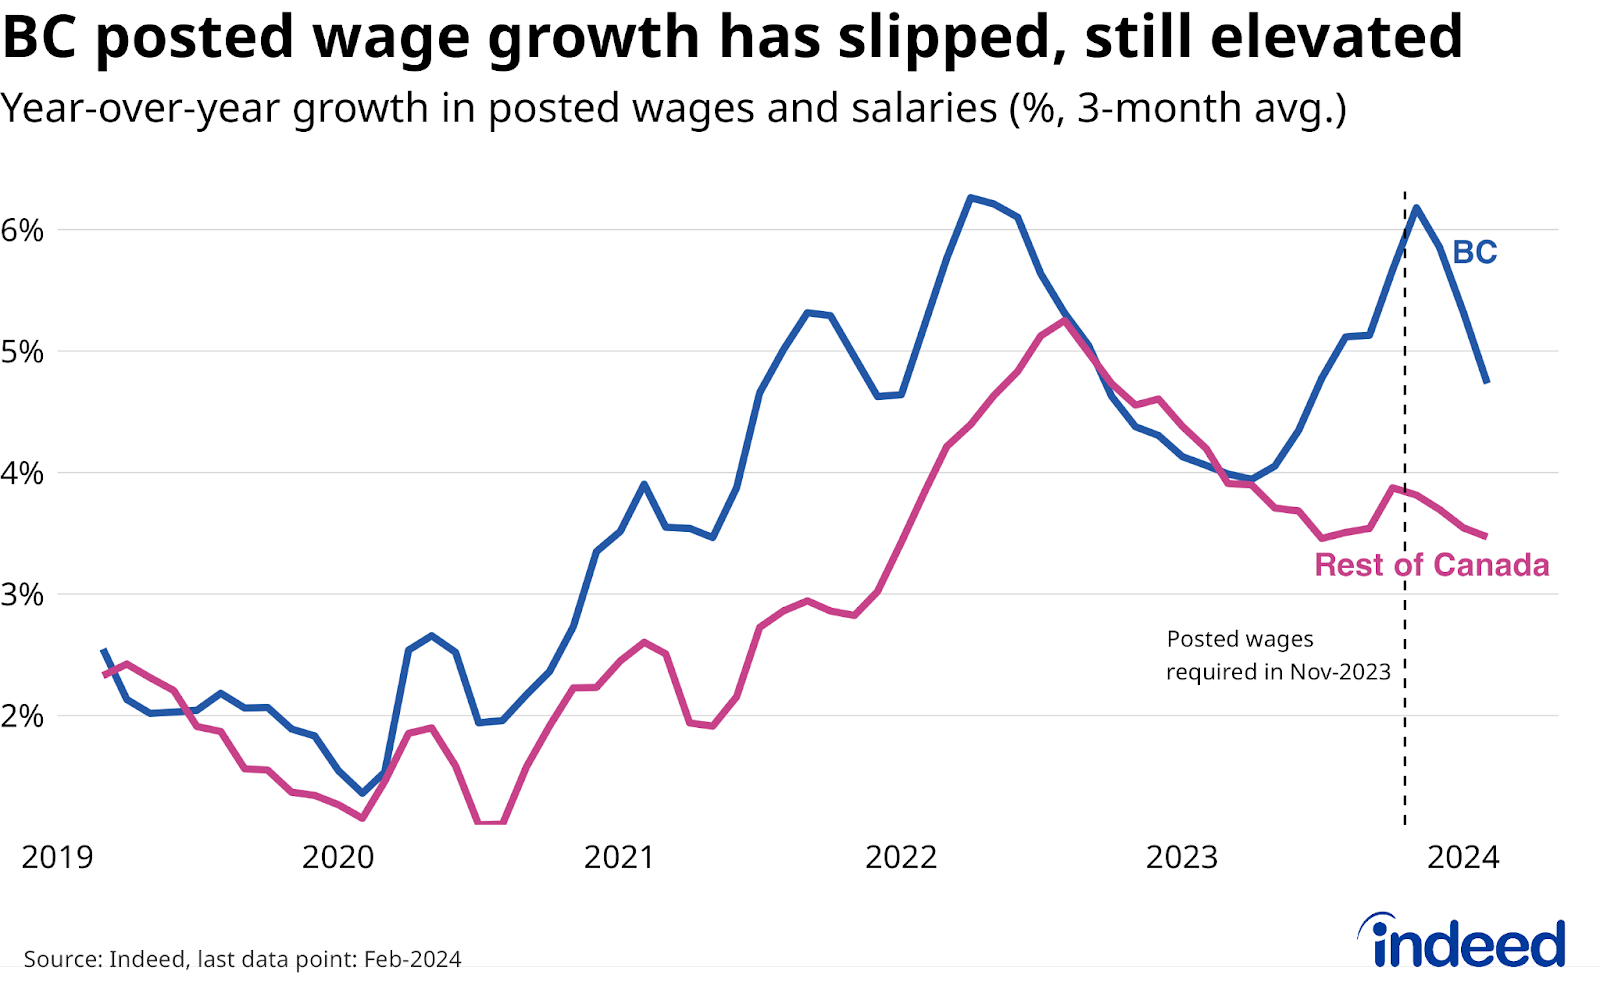 Line chart titled “BC posted wage growth has slipped, still elevated,” shows the 3-month average year-over-year growth in posted wages and salaries for job postings in BC, and the rest of Canada, between March 2019 and February 2024. Posted wage growth in BC slipped from 5.7% to 4.7% between October and February, although it remained above the 3.5% pace in the rest of Canada. 